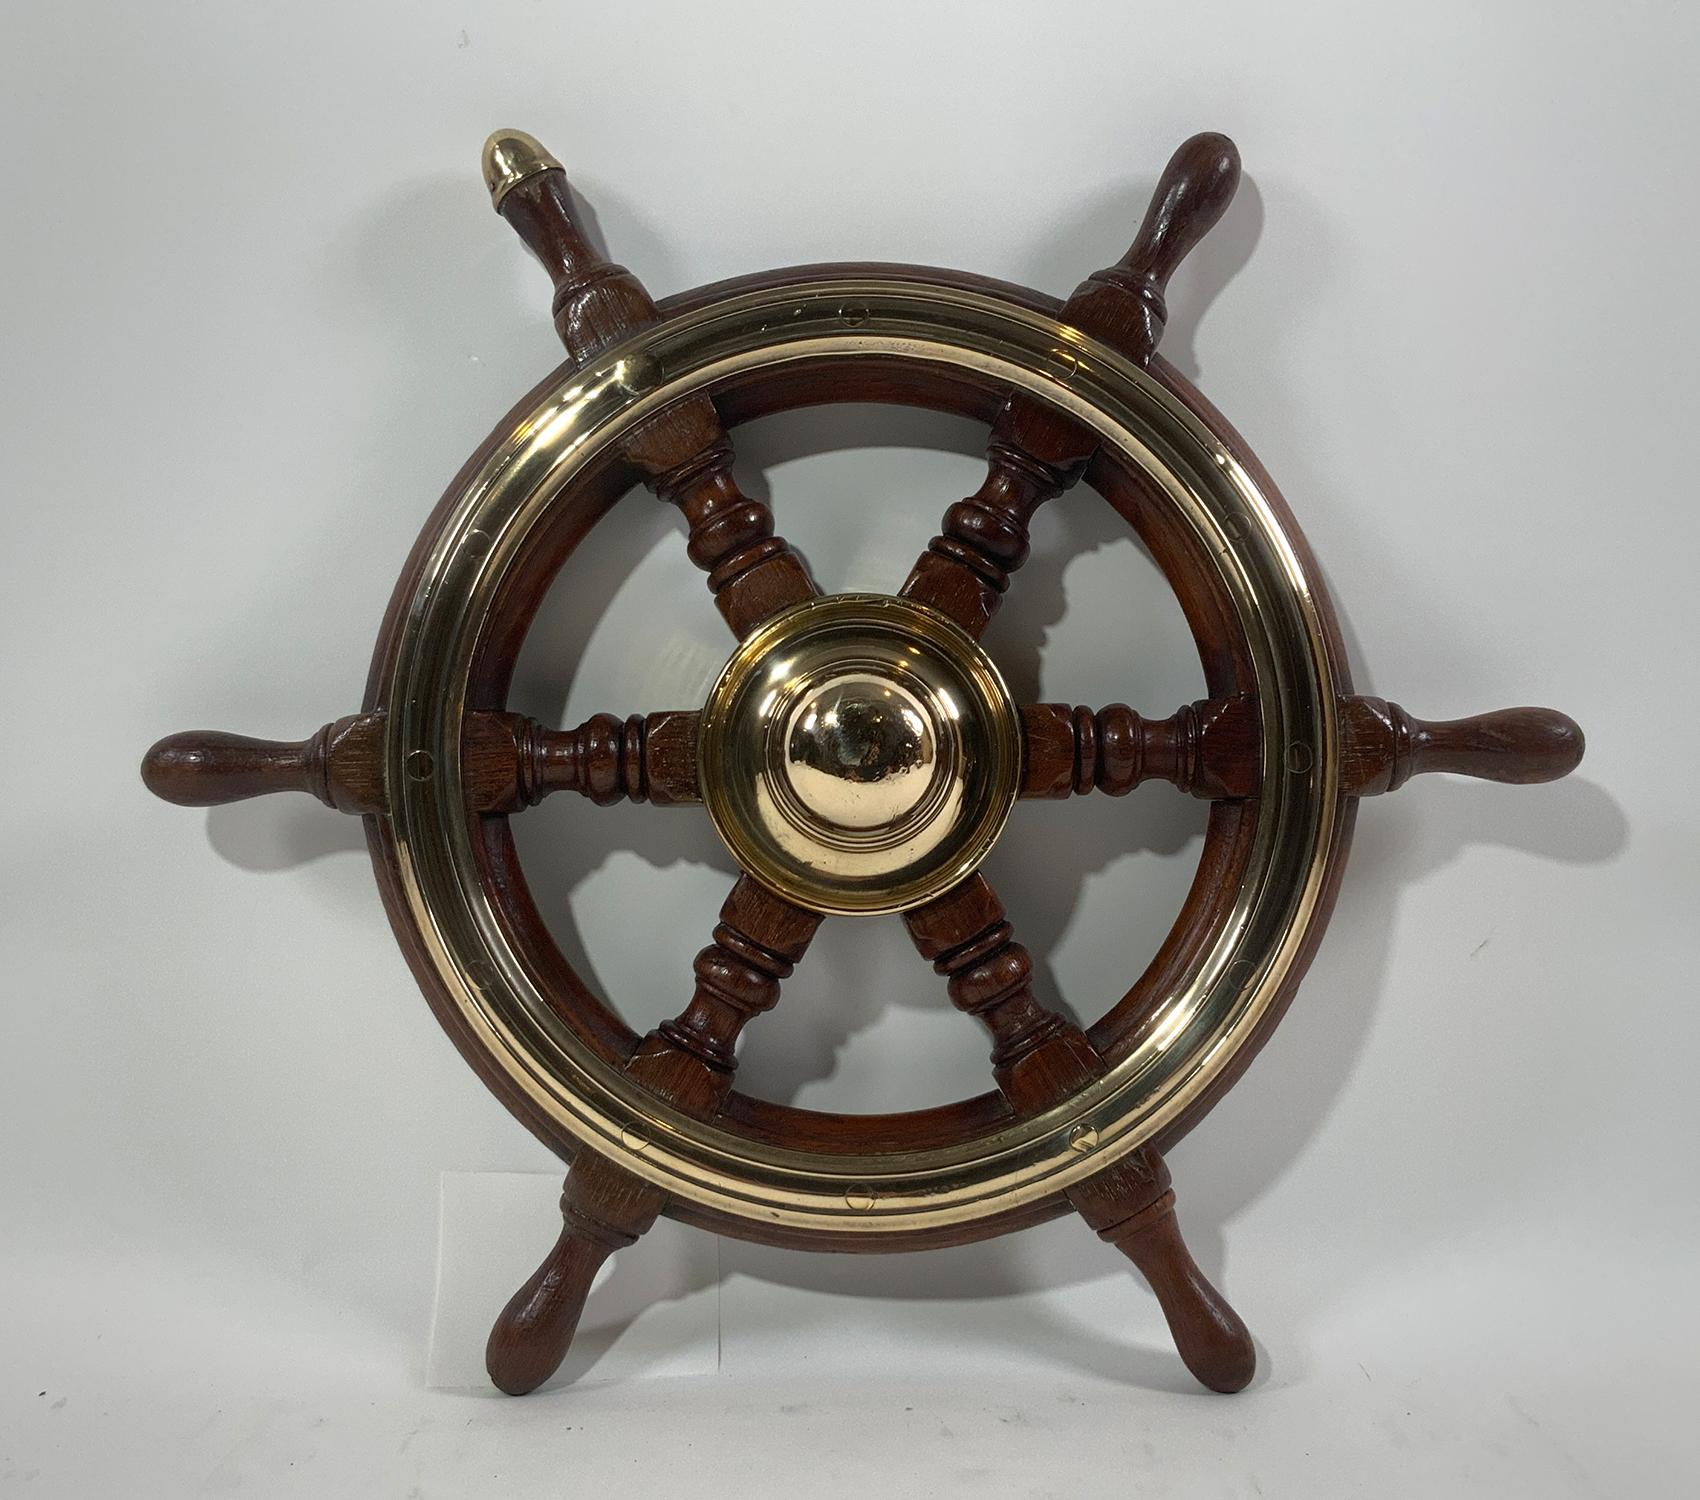 Small boat or yacht wheel with varnish finish and highly polished brass hub and trim ring. This is an exceptional little relic. Circa 1890. English made.

Weight: 8 LBS
Overall Dimensions: 18